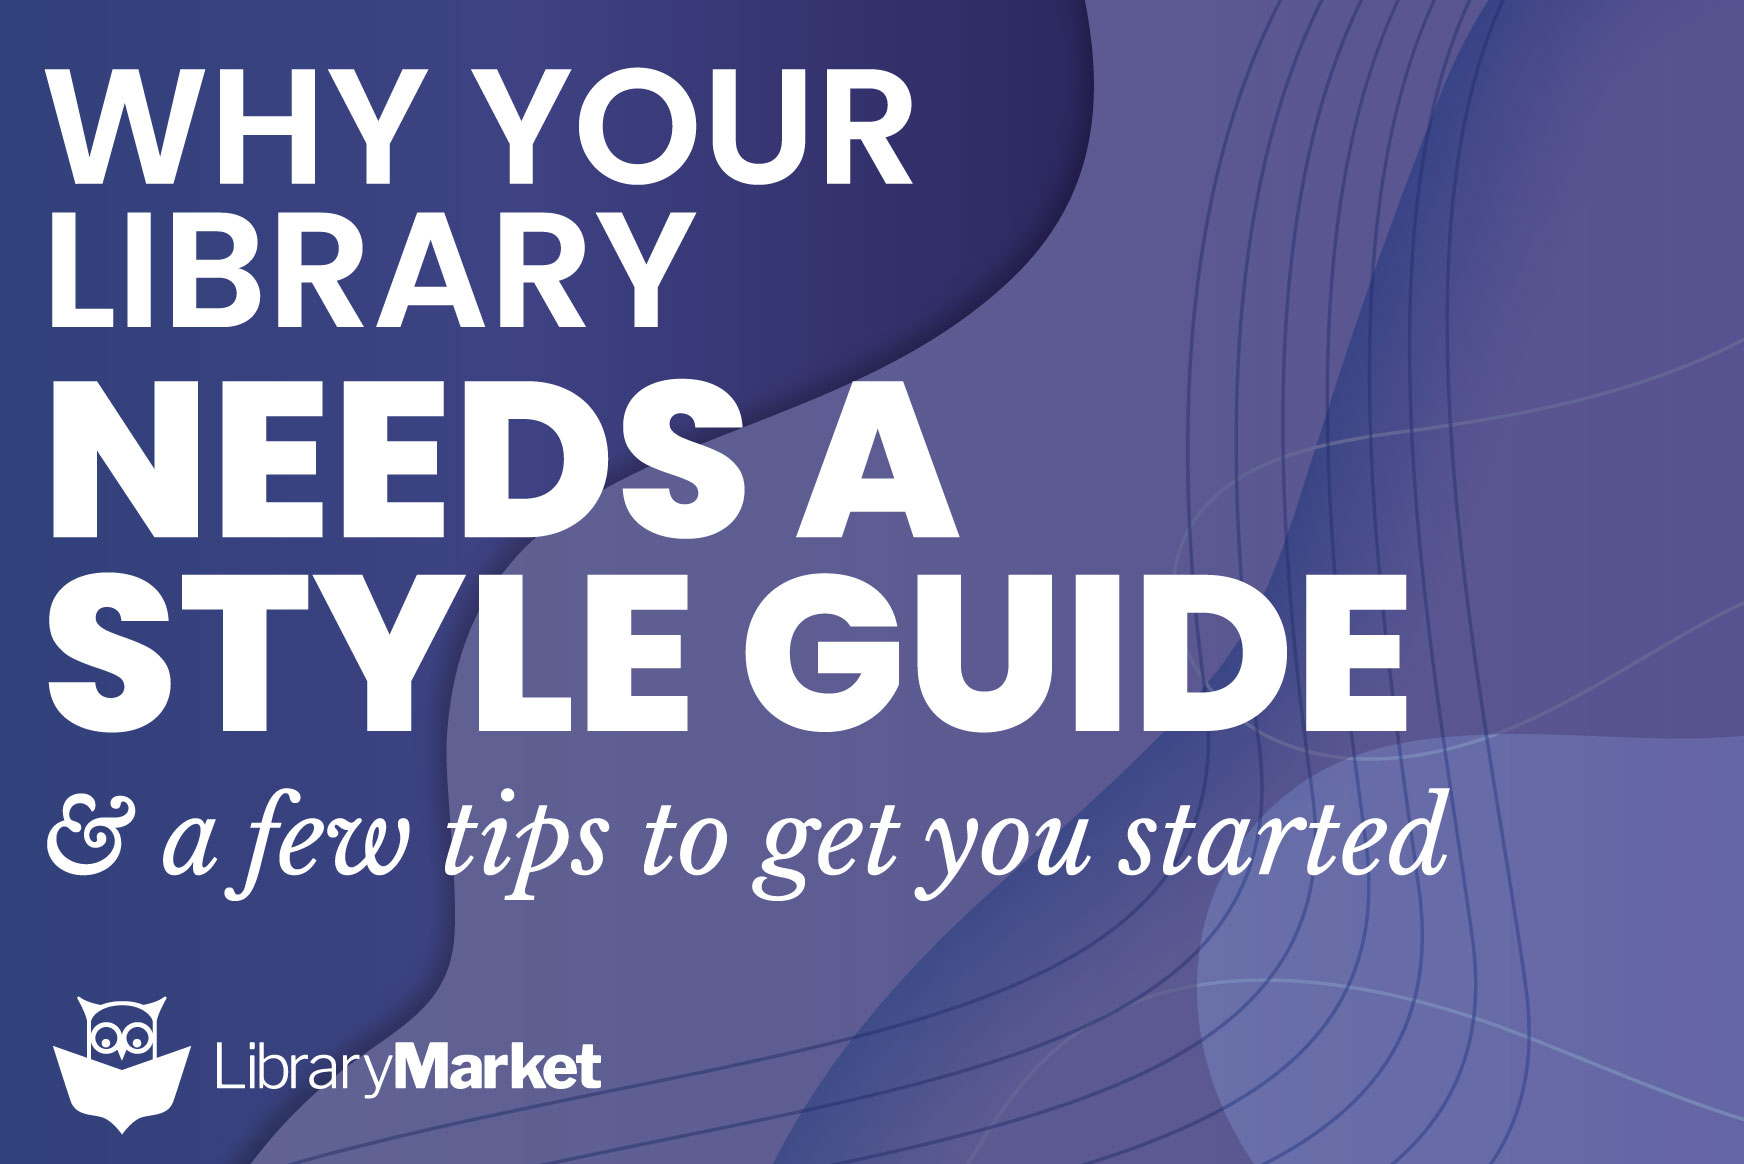 Why Your Library Needs a Style Guide